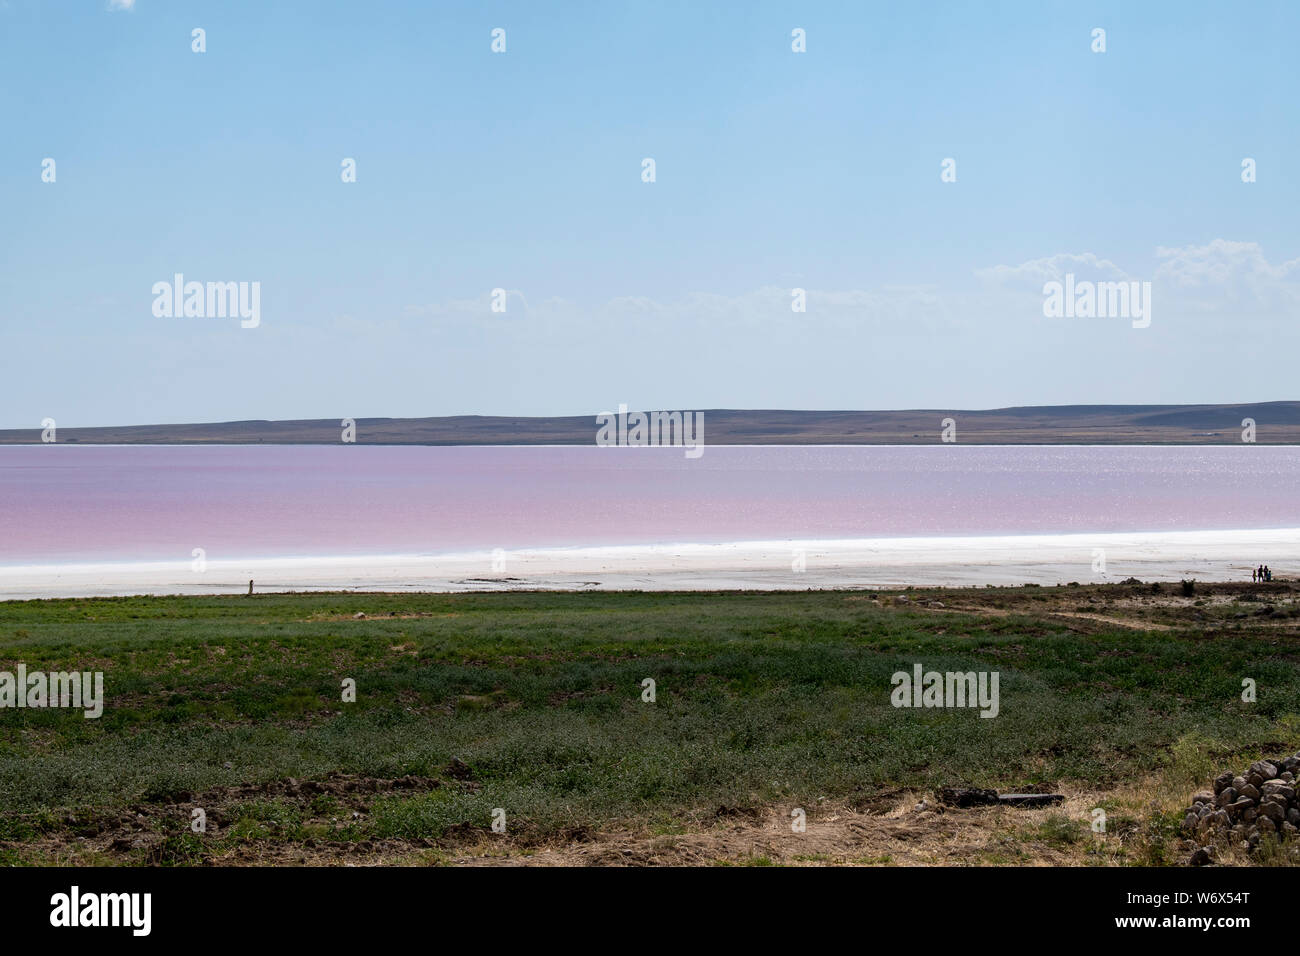 Turkey, Central Anatolia: aerial view of Lake Tuz, Tuz Golu, pink and red water of the Salt Lake, one of the largest hypersaline lakes in the world Stock Photo